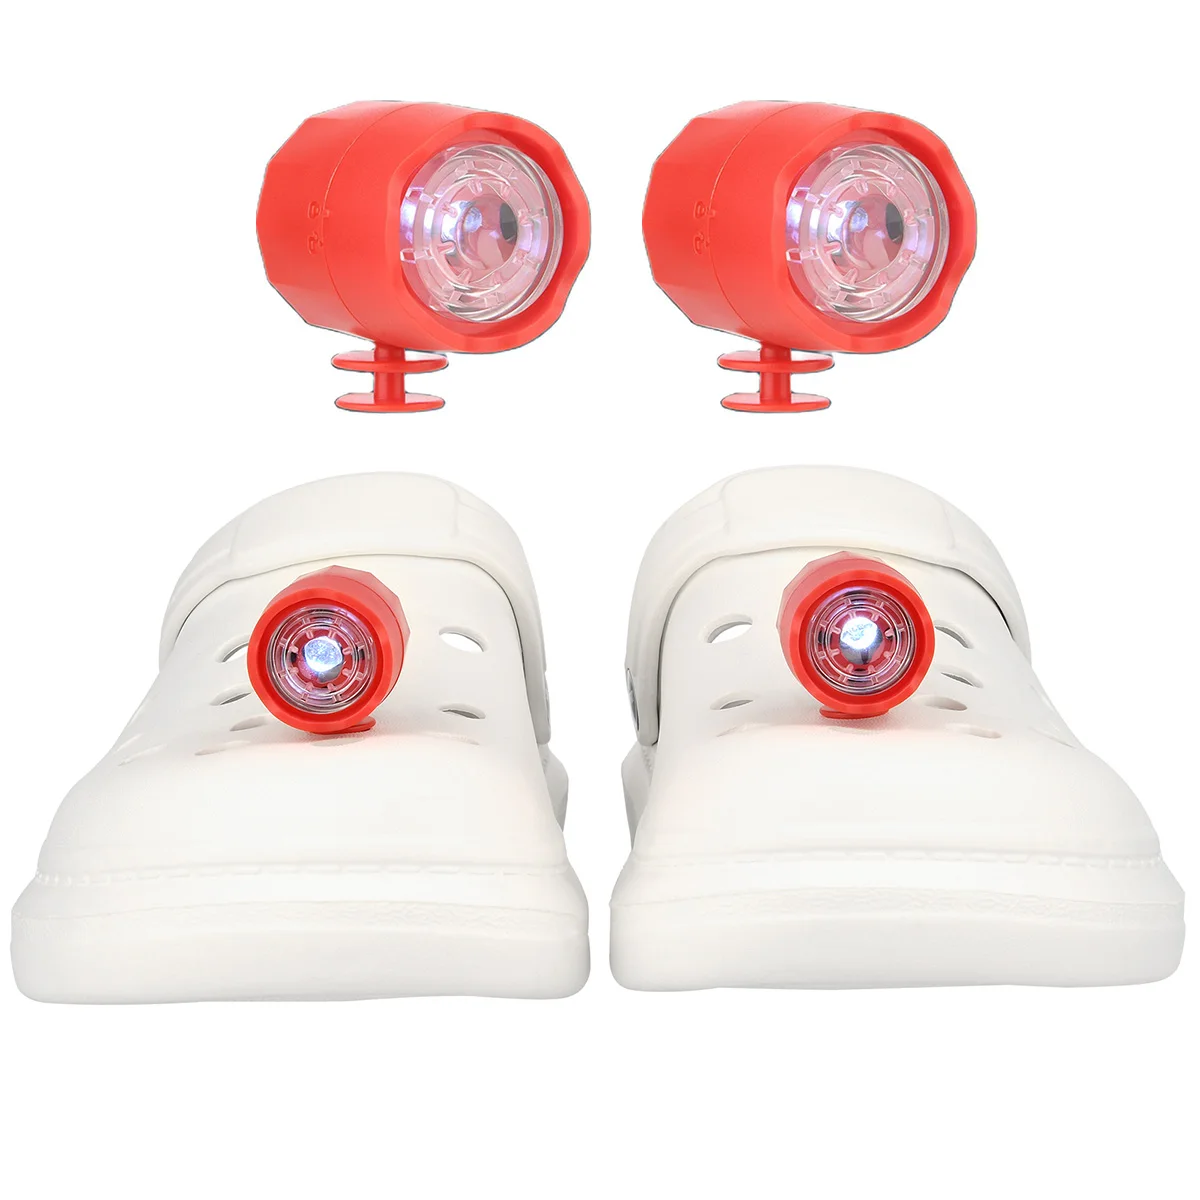 Waterproof Ornament Croc Headlights, 2Pcs LED Croc Clogs Shoes Lights, Accessories for Running Walking Camping Gift